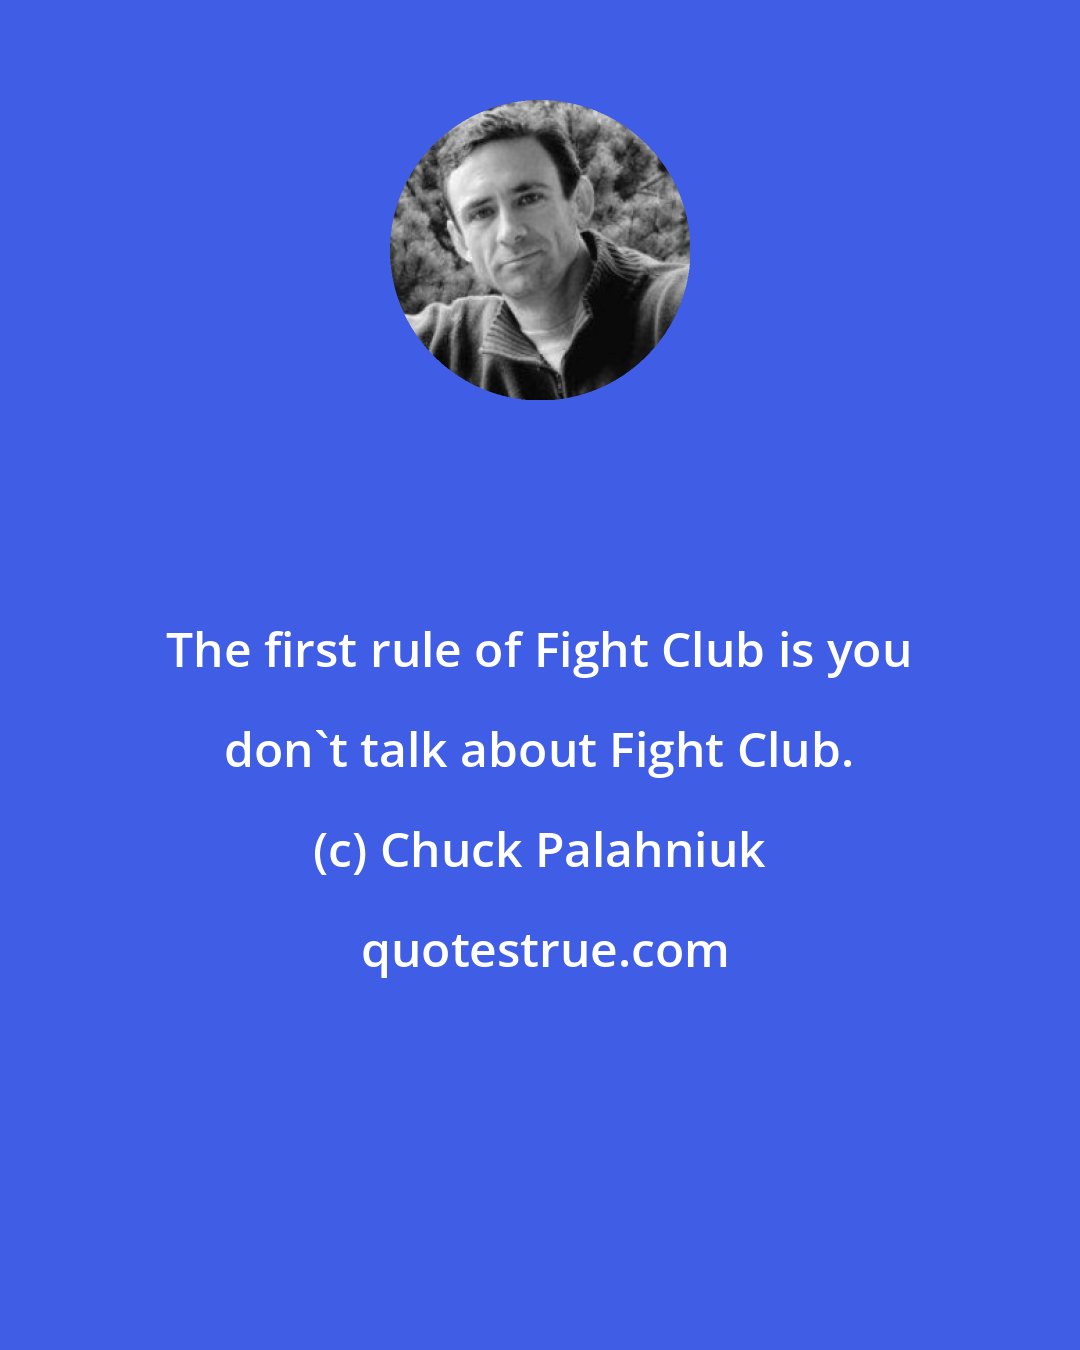 Chuck Palahniuk: The first rule of Fight Club is you don't talk about Fight Club.